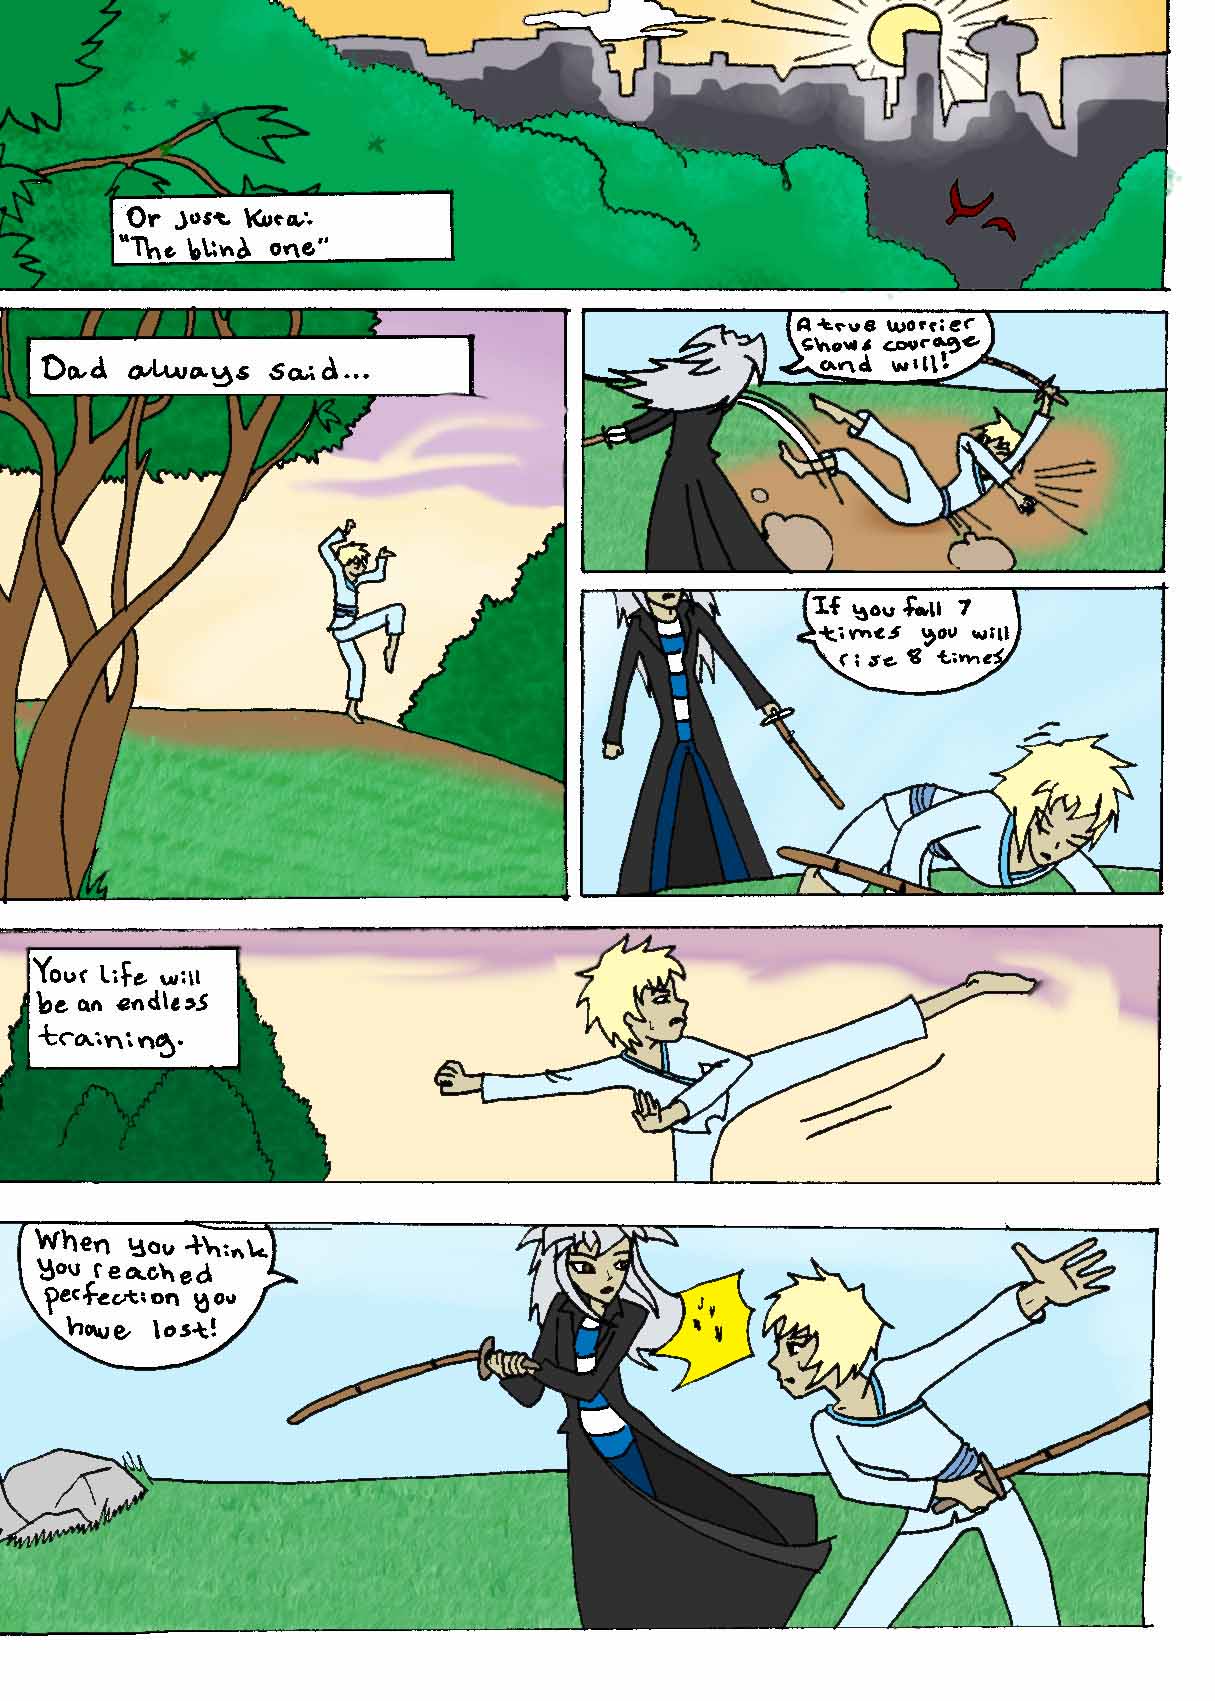 Who am I? page 3 by Bakura_Angel_of_Light